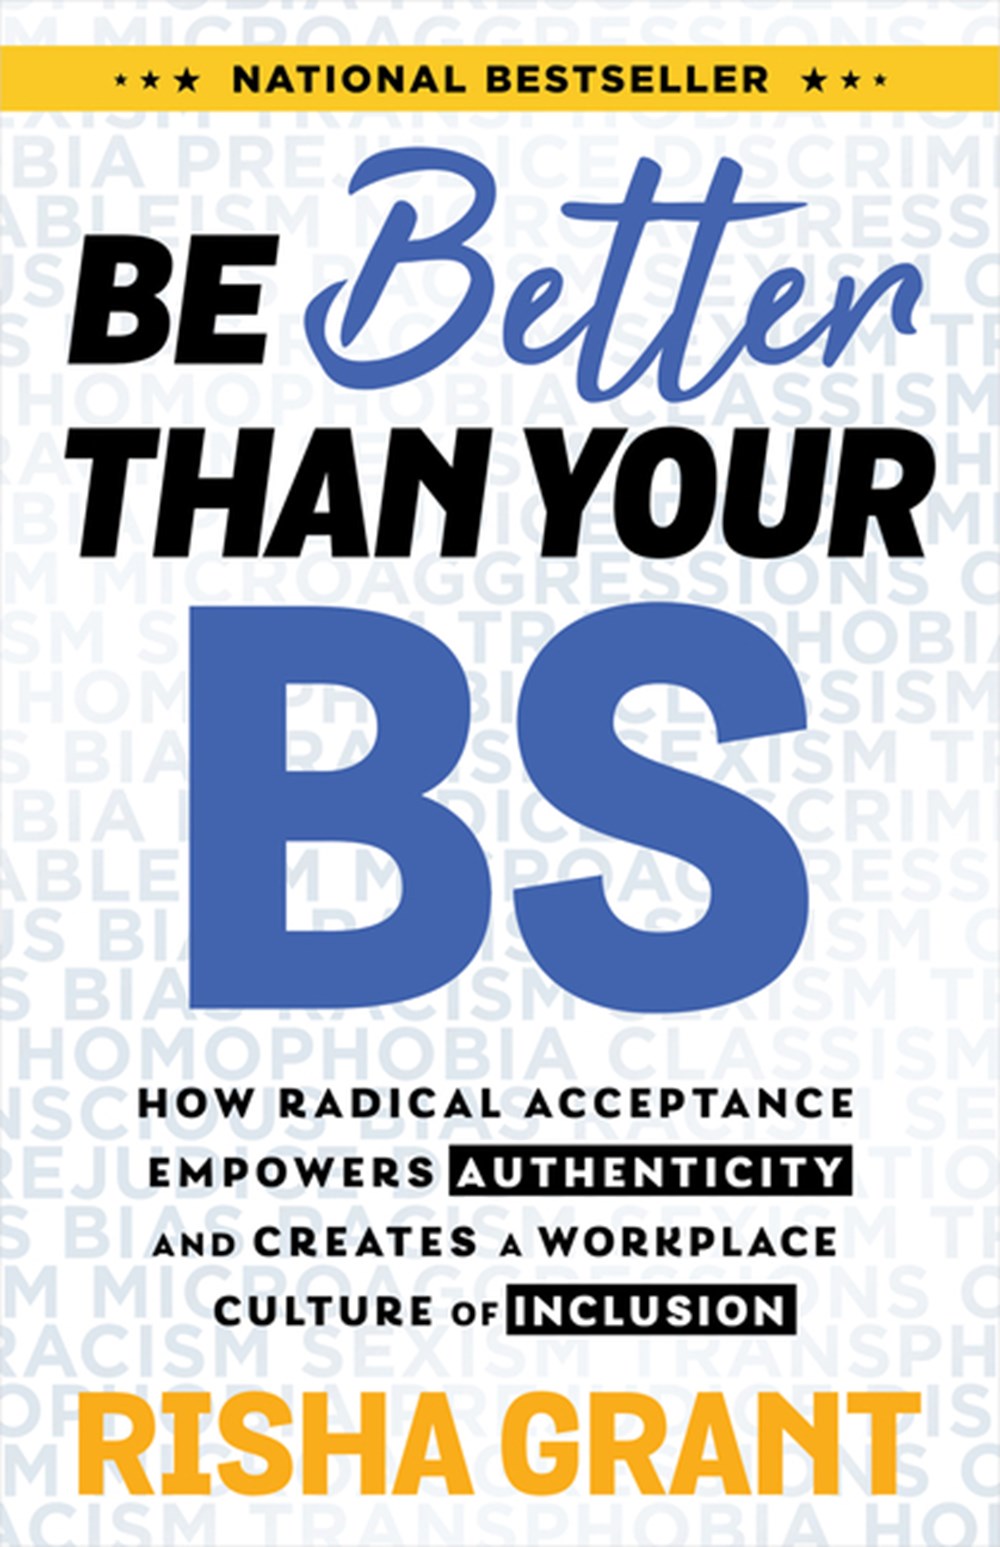 Be Better Than Your Bs: How Radical Acceptance Empowers Authenticity and Creates a Workplace Culture